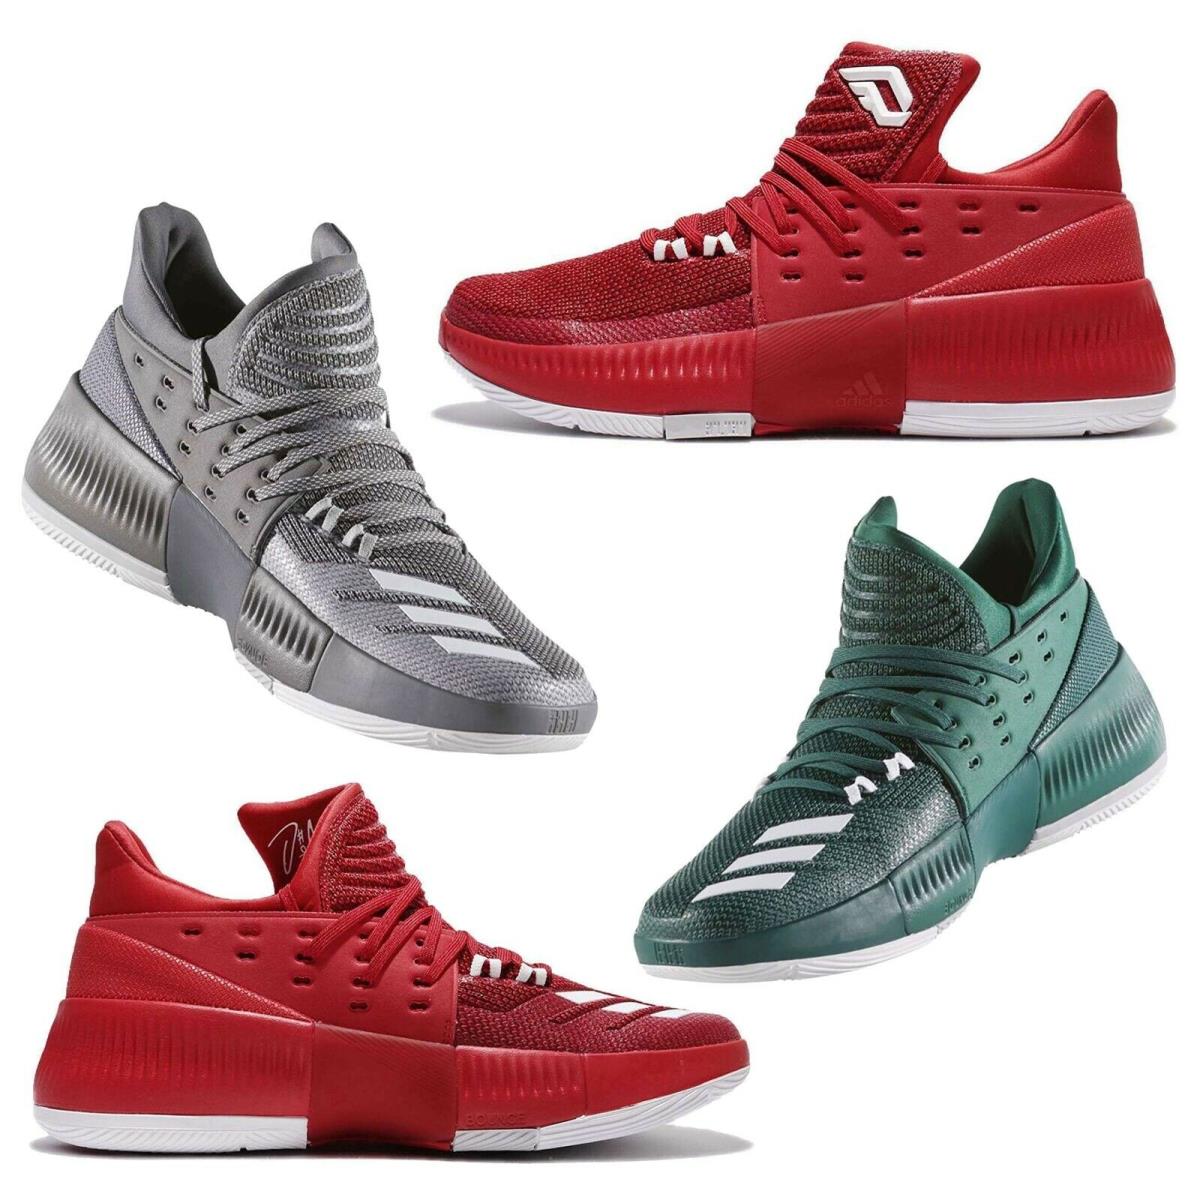 Adidas Men s Athletic Sneakers Lace Up Dame 3 Basketball Shoes